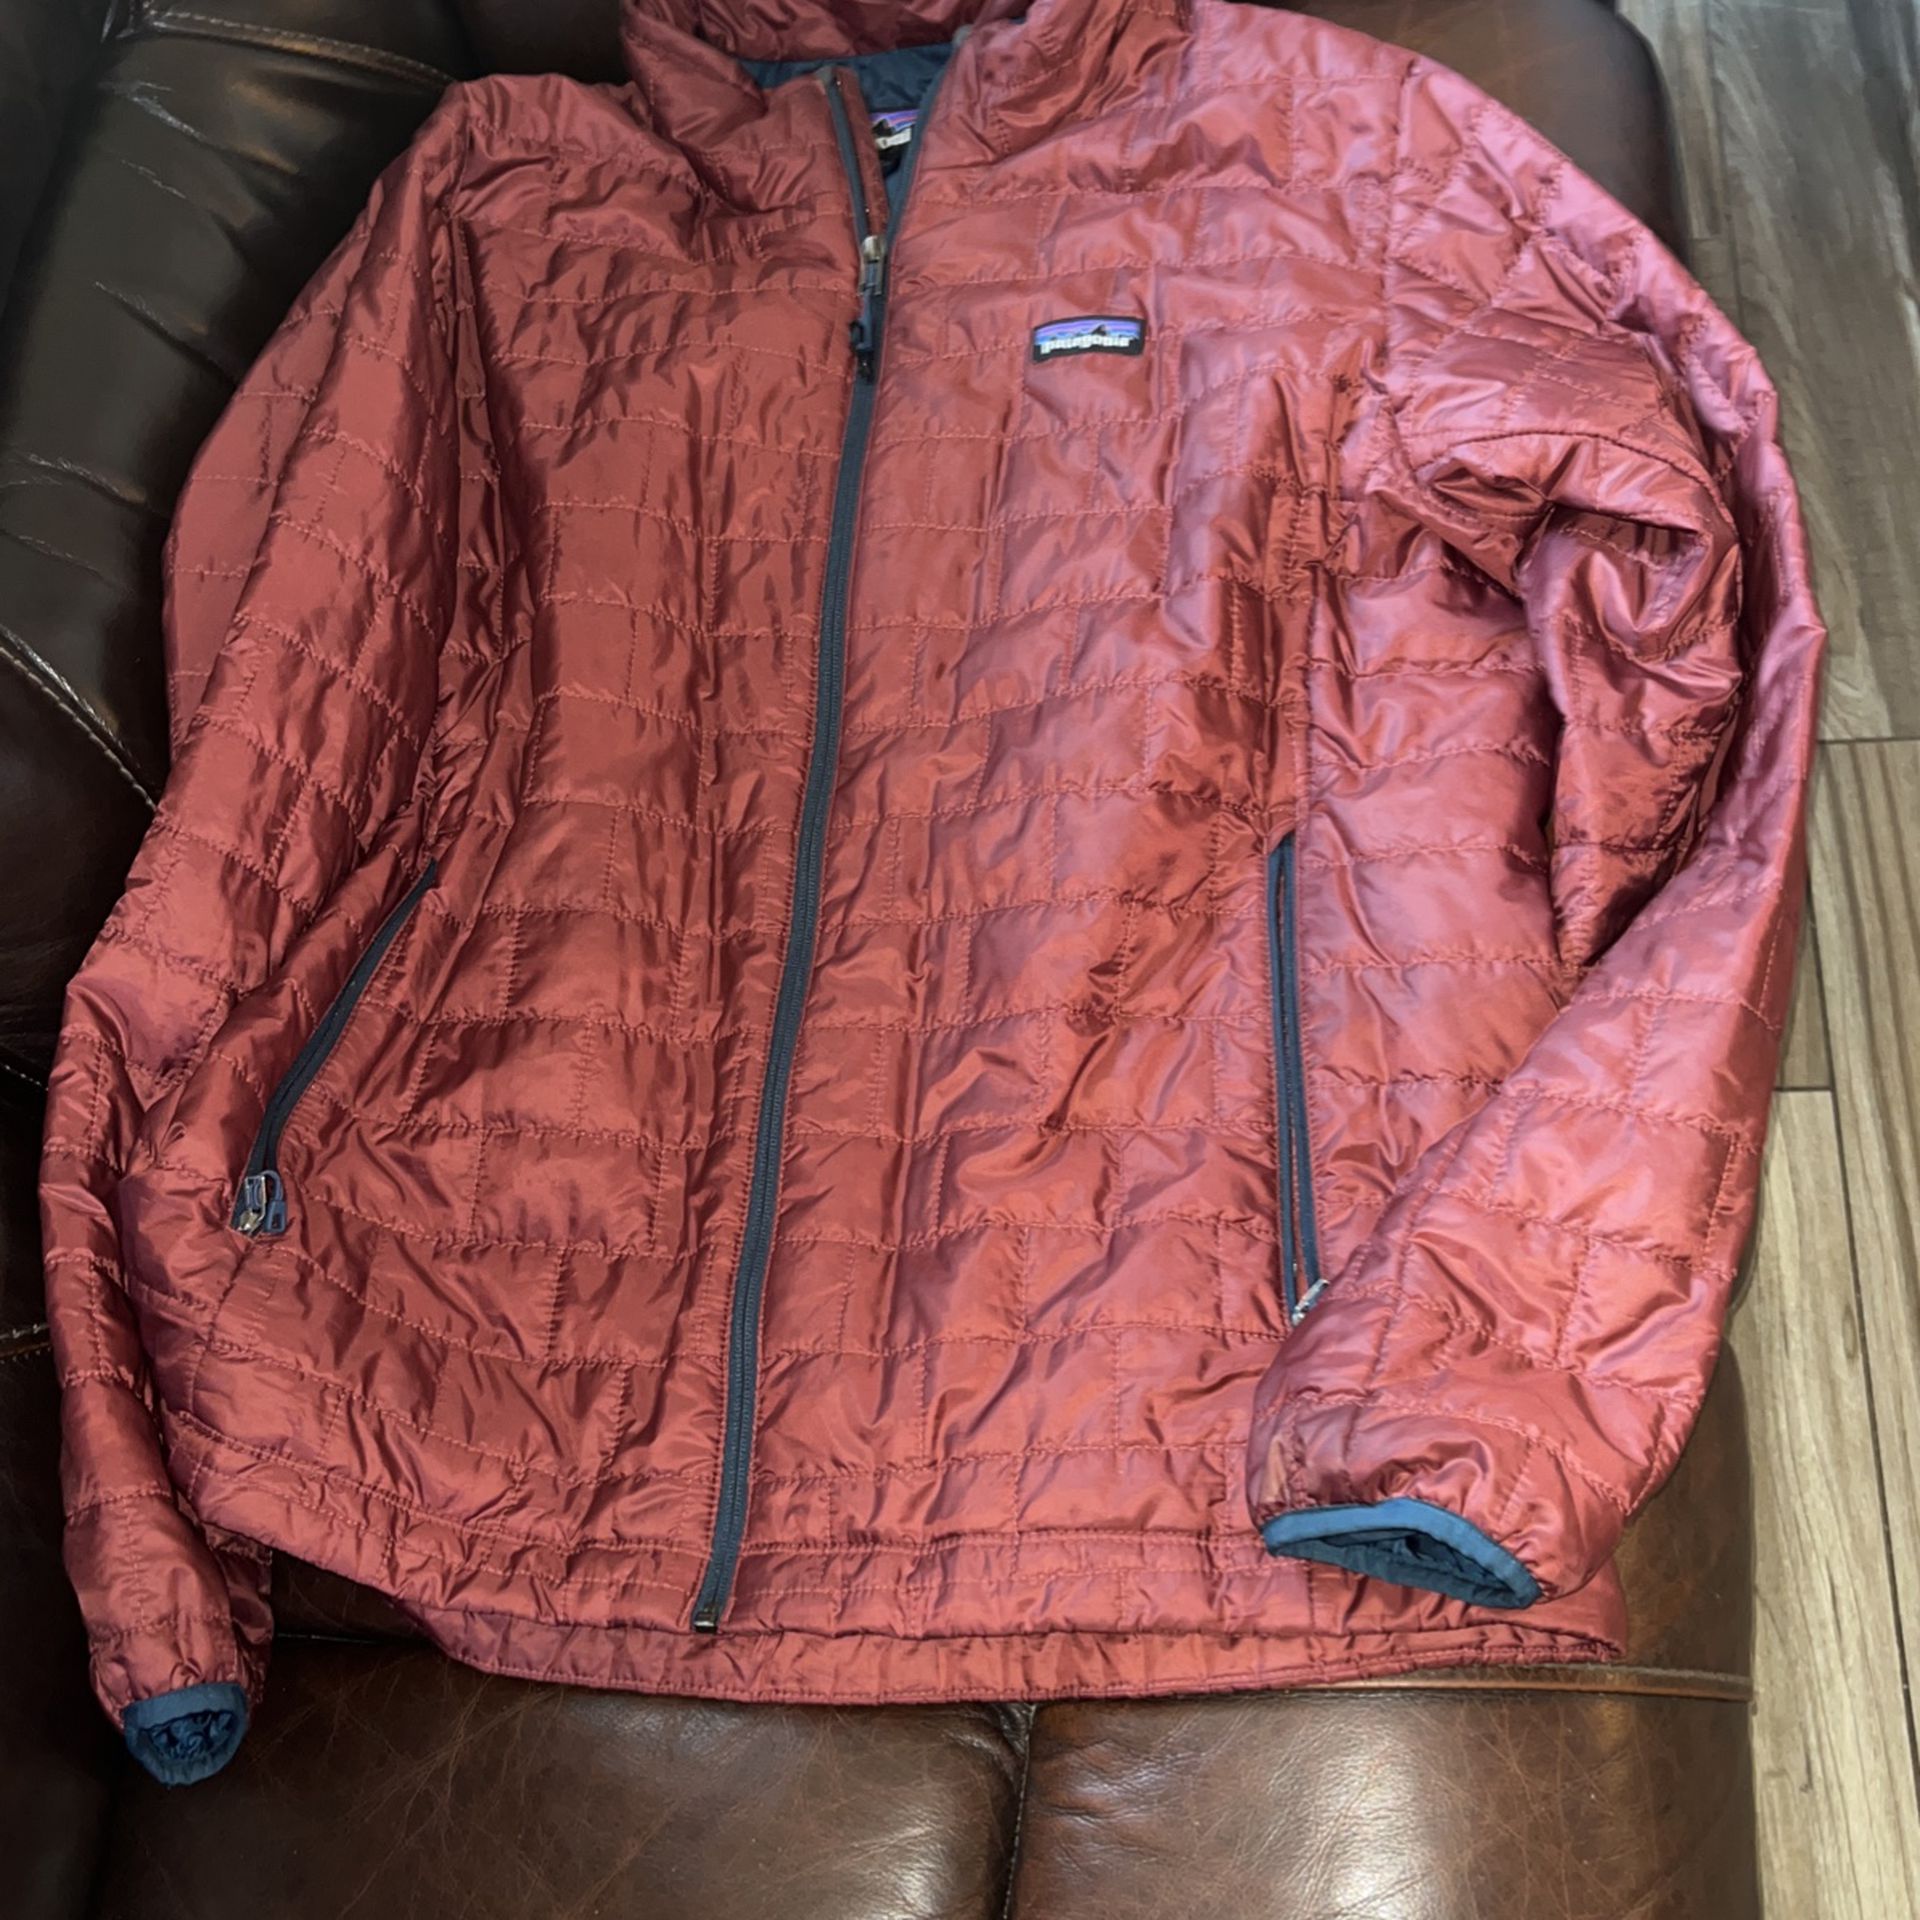 Patagonia Jacket For Women X Large Fit Large Women Too 